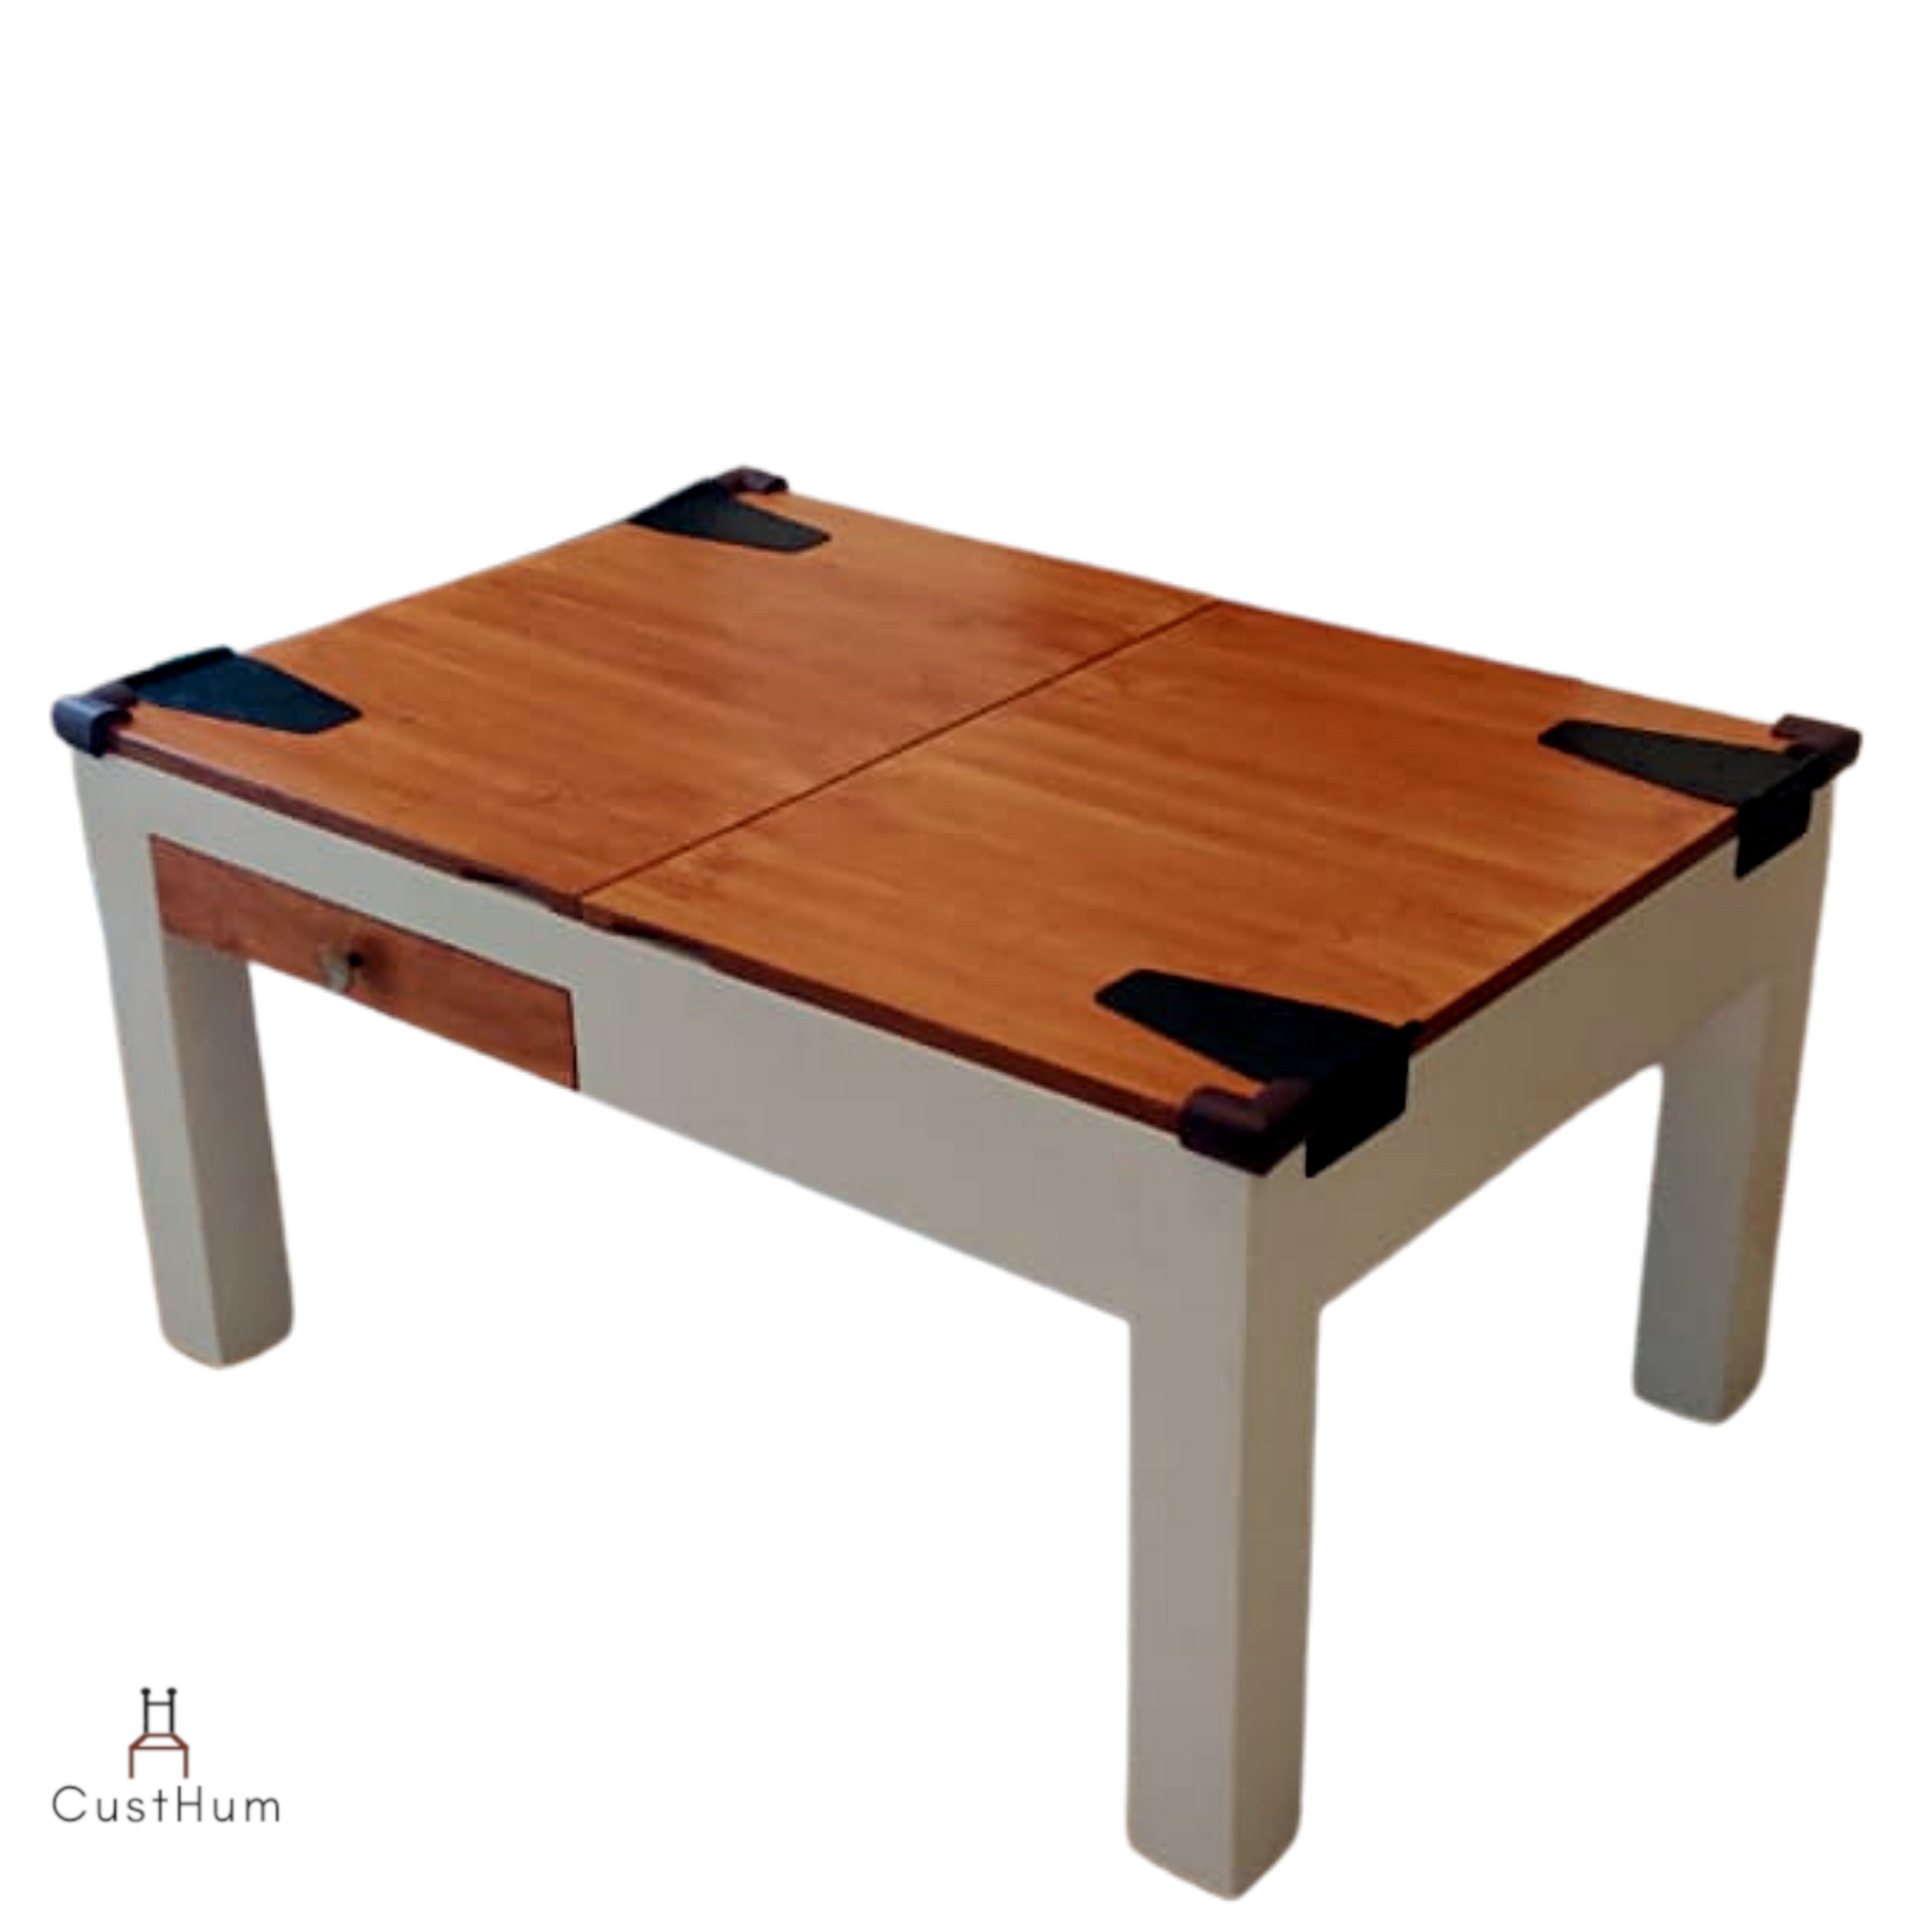 CustHum Spilsbury-coffee table with flaps to conceal space for jigaw puzzle (closed view)